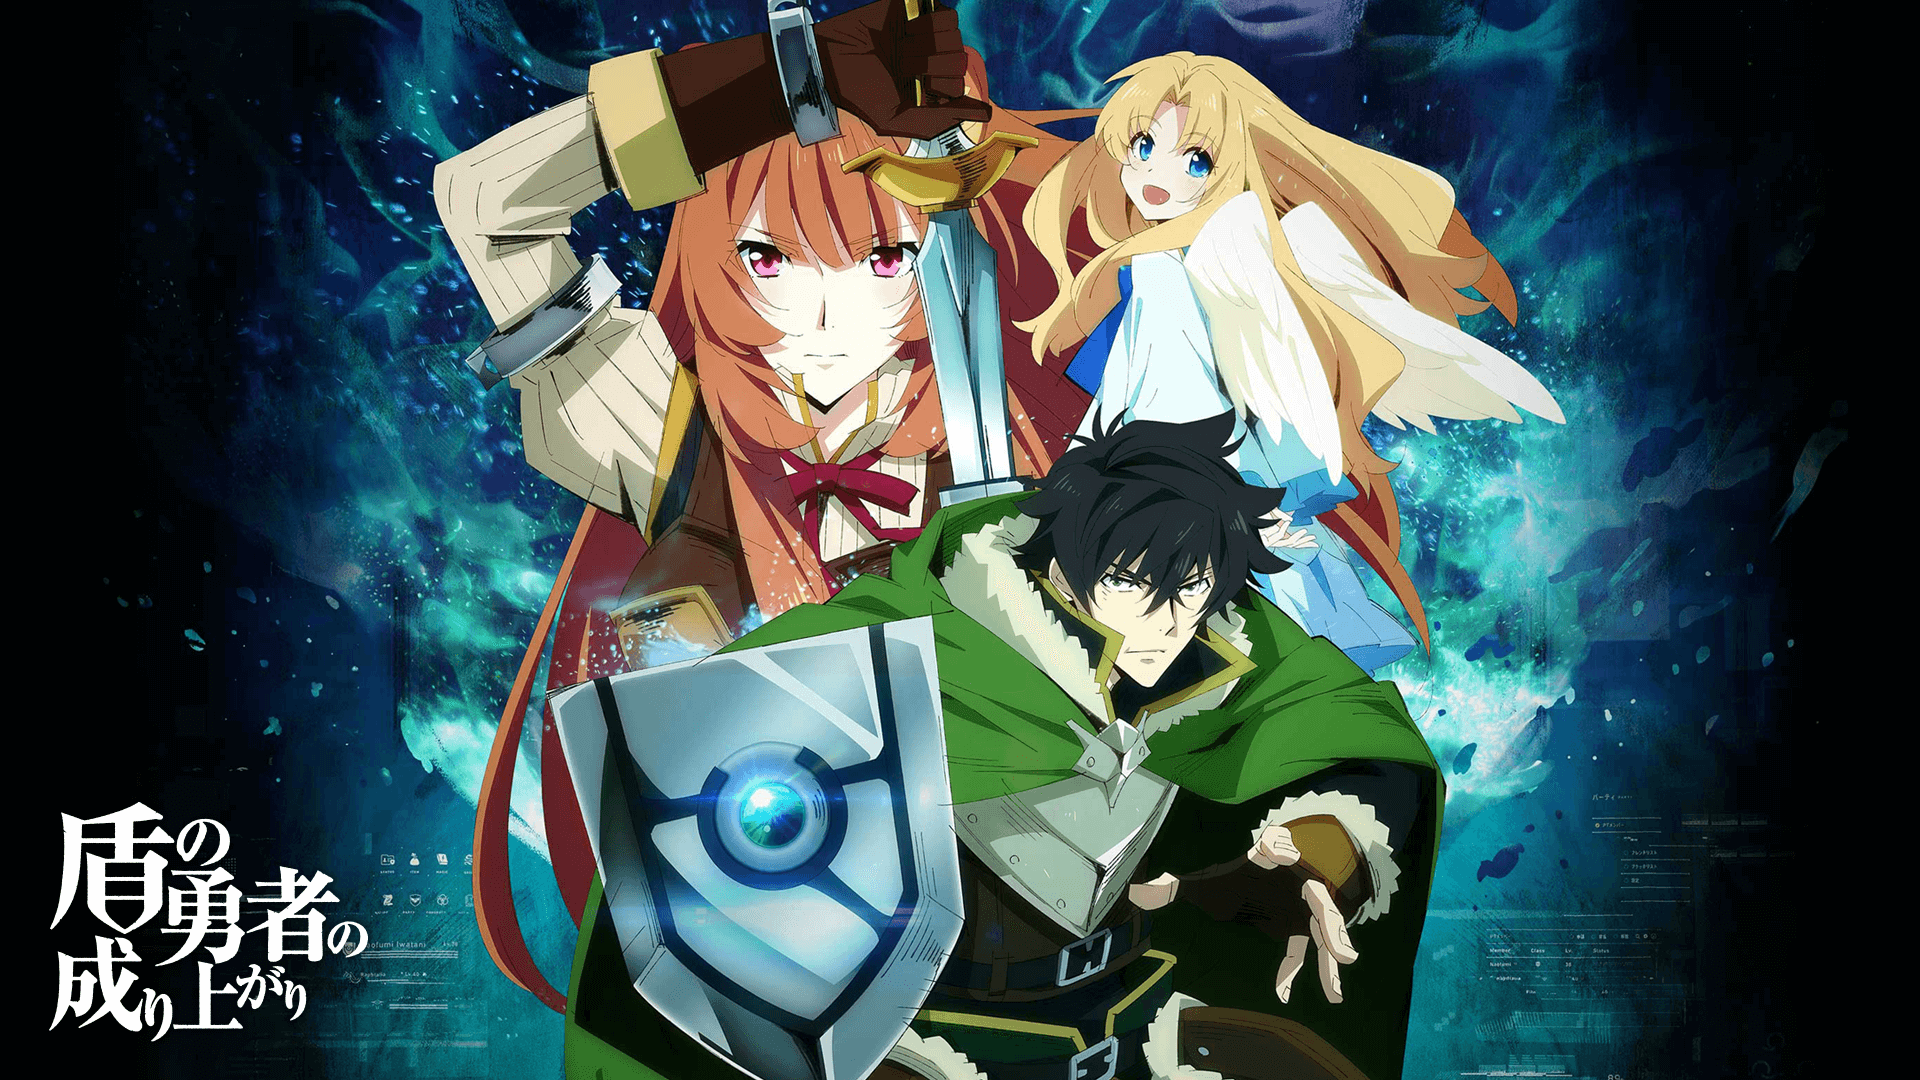 Anime The Rising of the Shield Hero HD Wallpaper by YusatsuNao